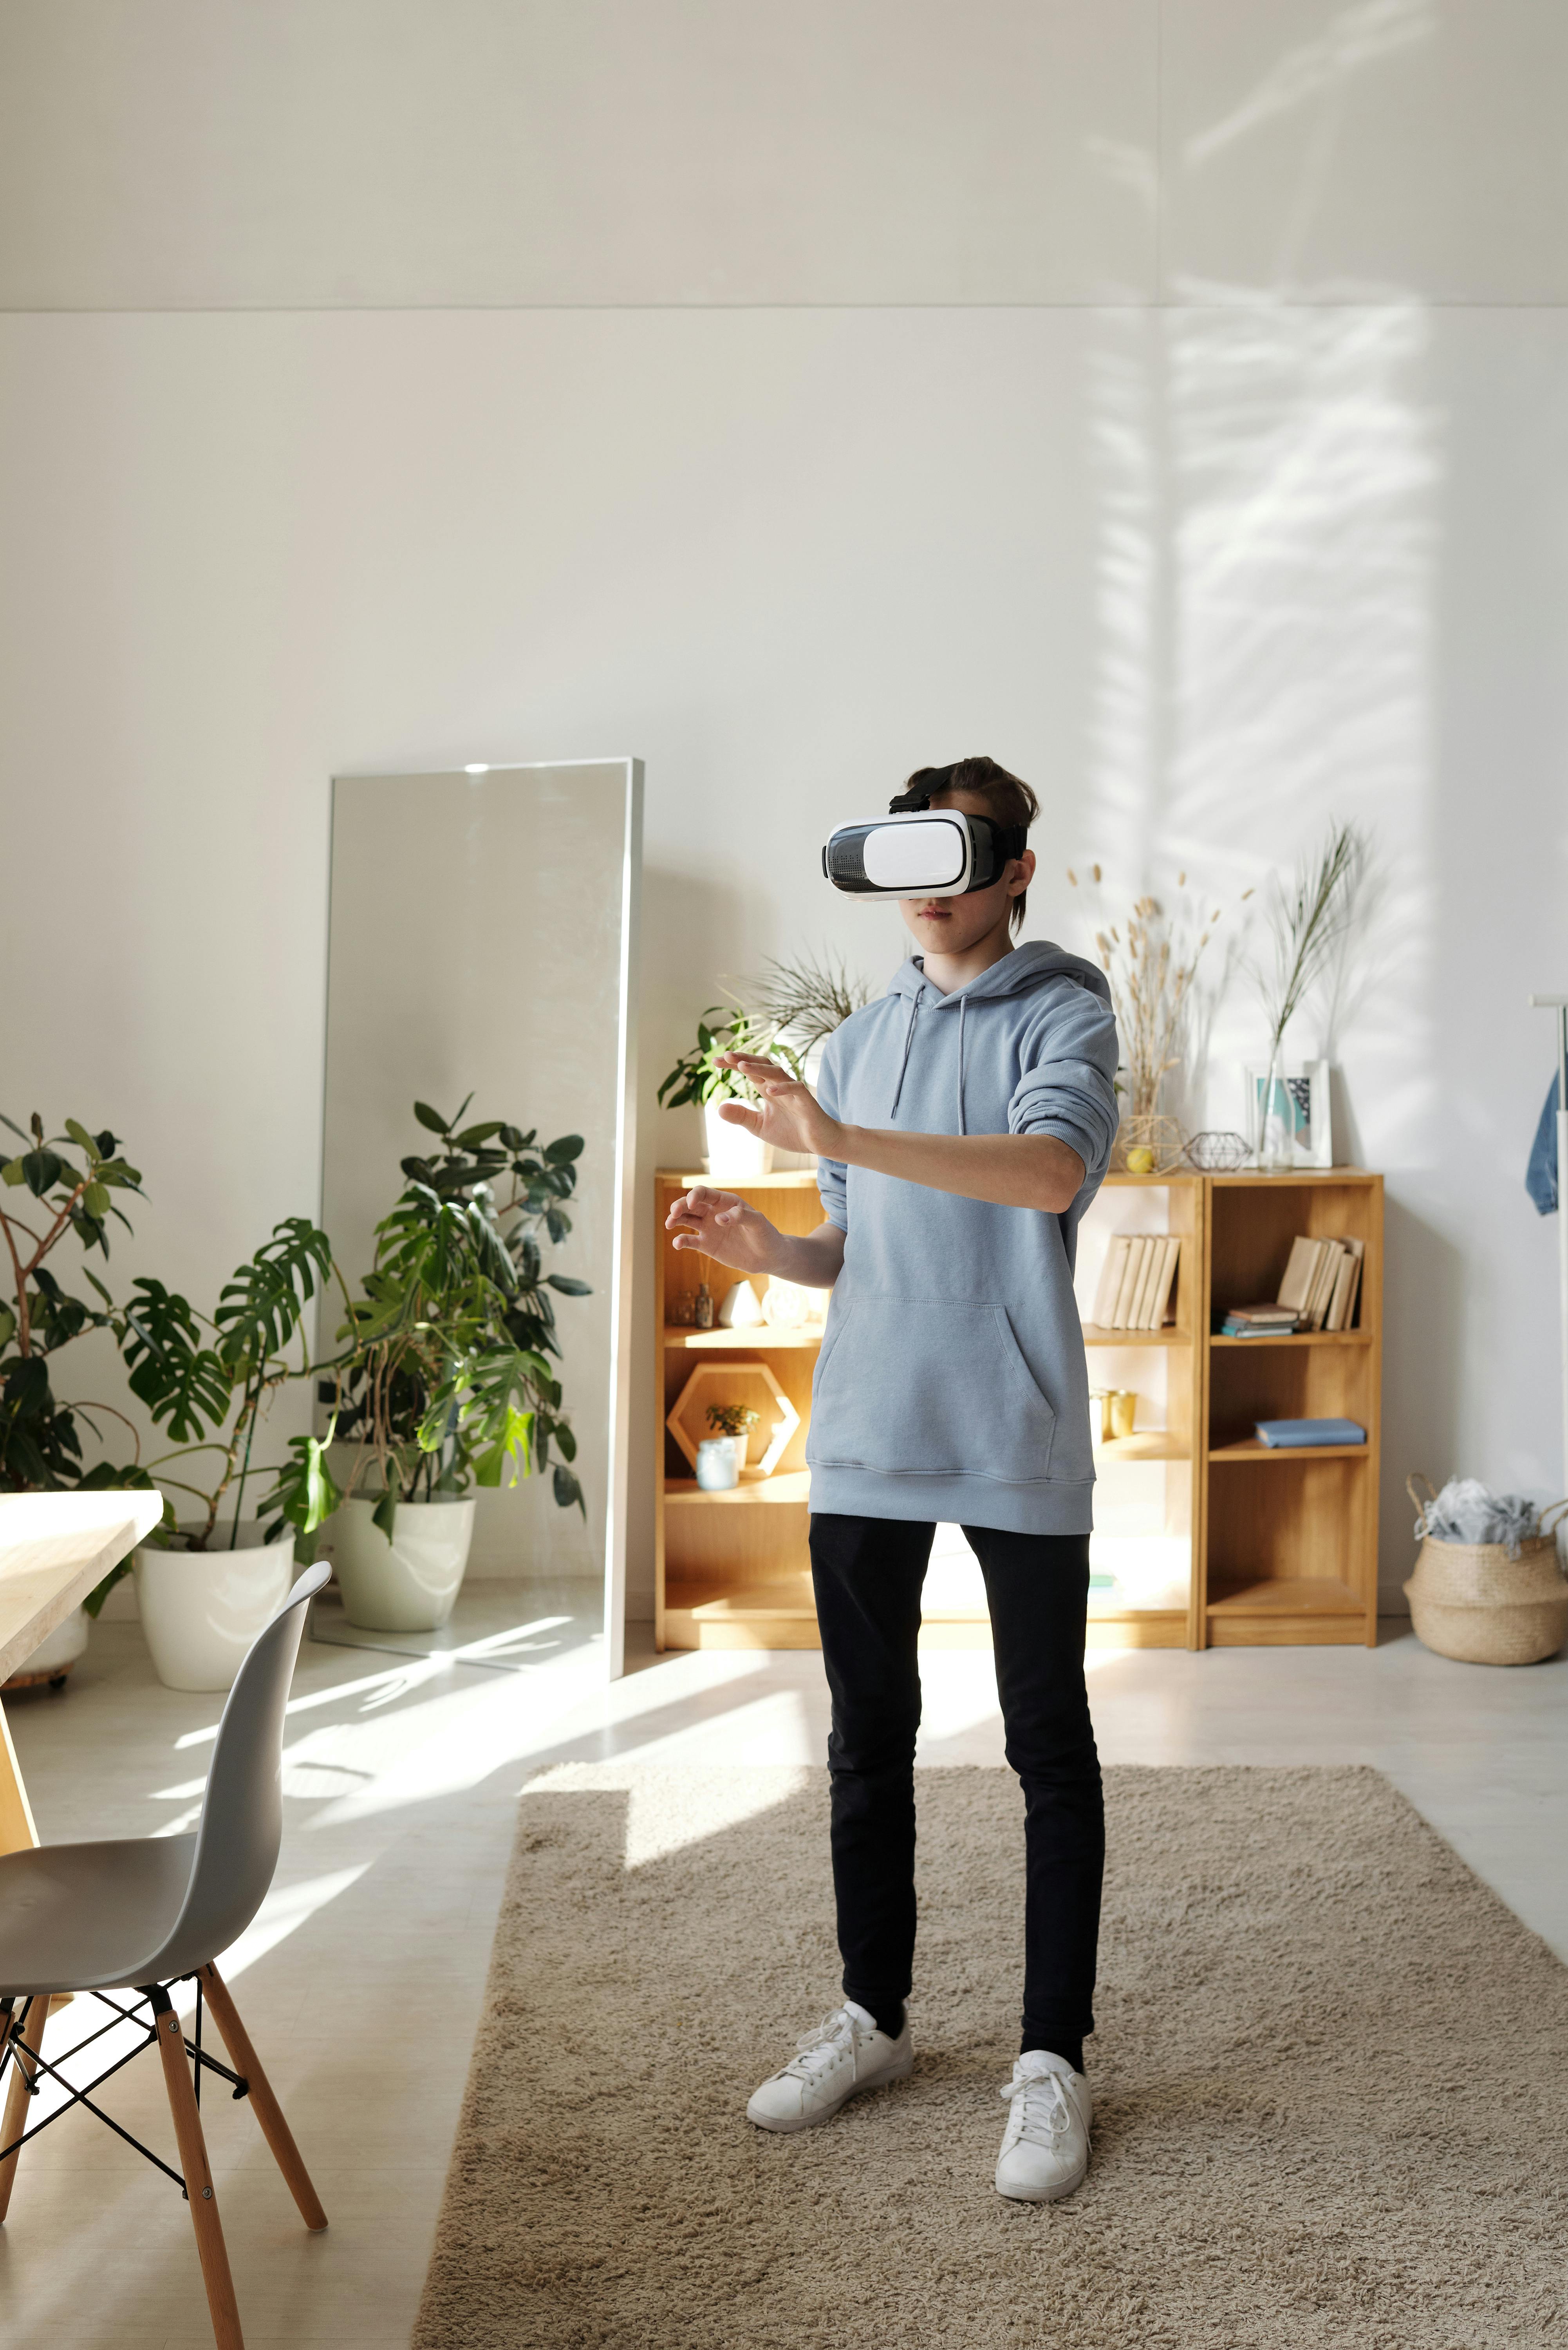 photo of boy standing while using vr headset